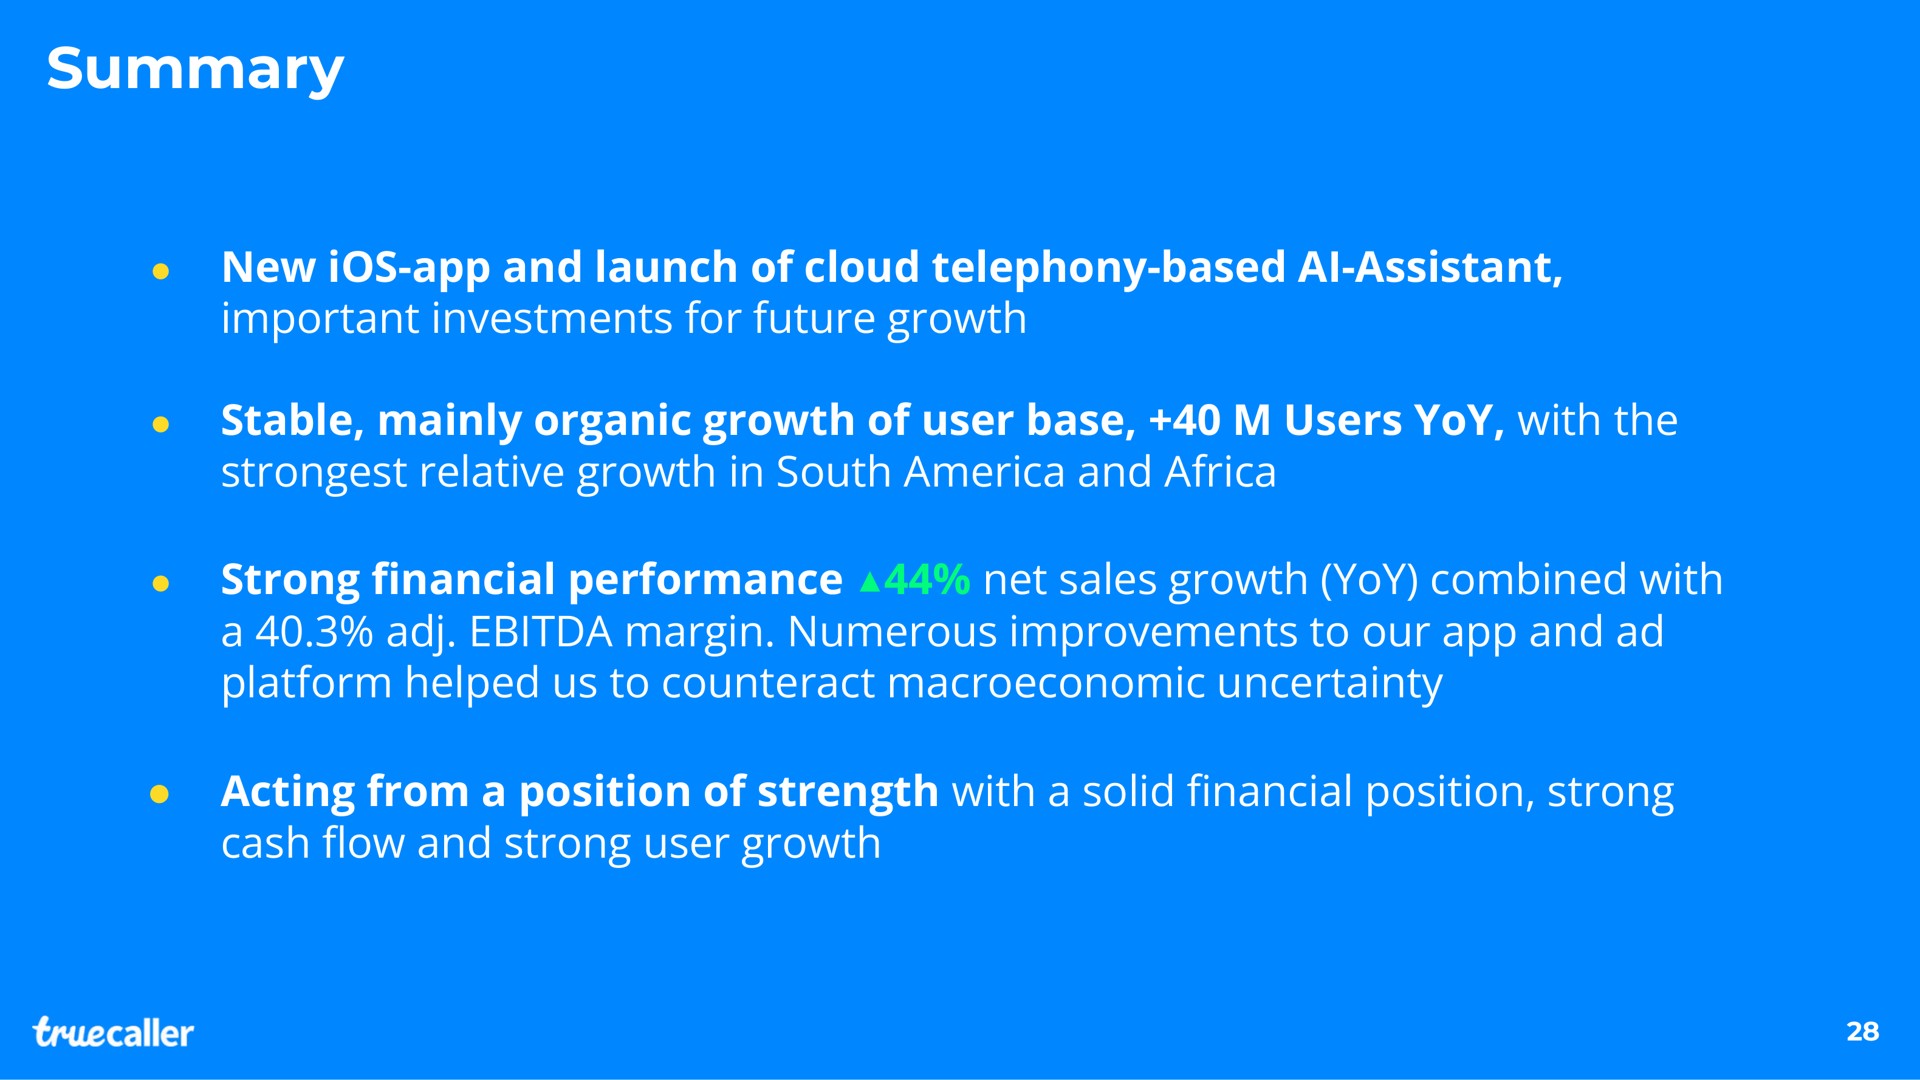 summary new ios and launch of cloud telephony based assistant important investments for future growth stable mainly organic growth of user base users yoy with the relative growth in south and strong performance net sales growth yoy combined with a margin numerous improvements to our and platform helped us to counteract uncertainty acting from a position of strength with a solid position strong cash and strong user growth assistant financial financial flow | Truecaller